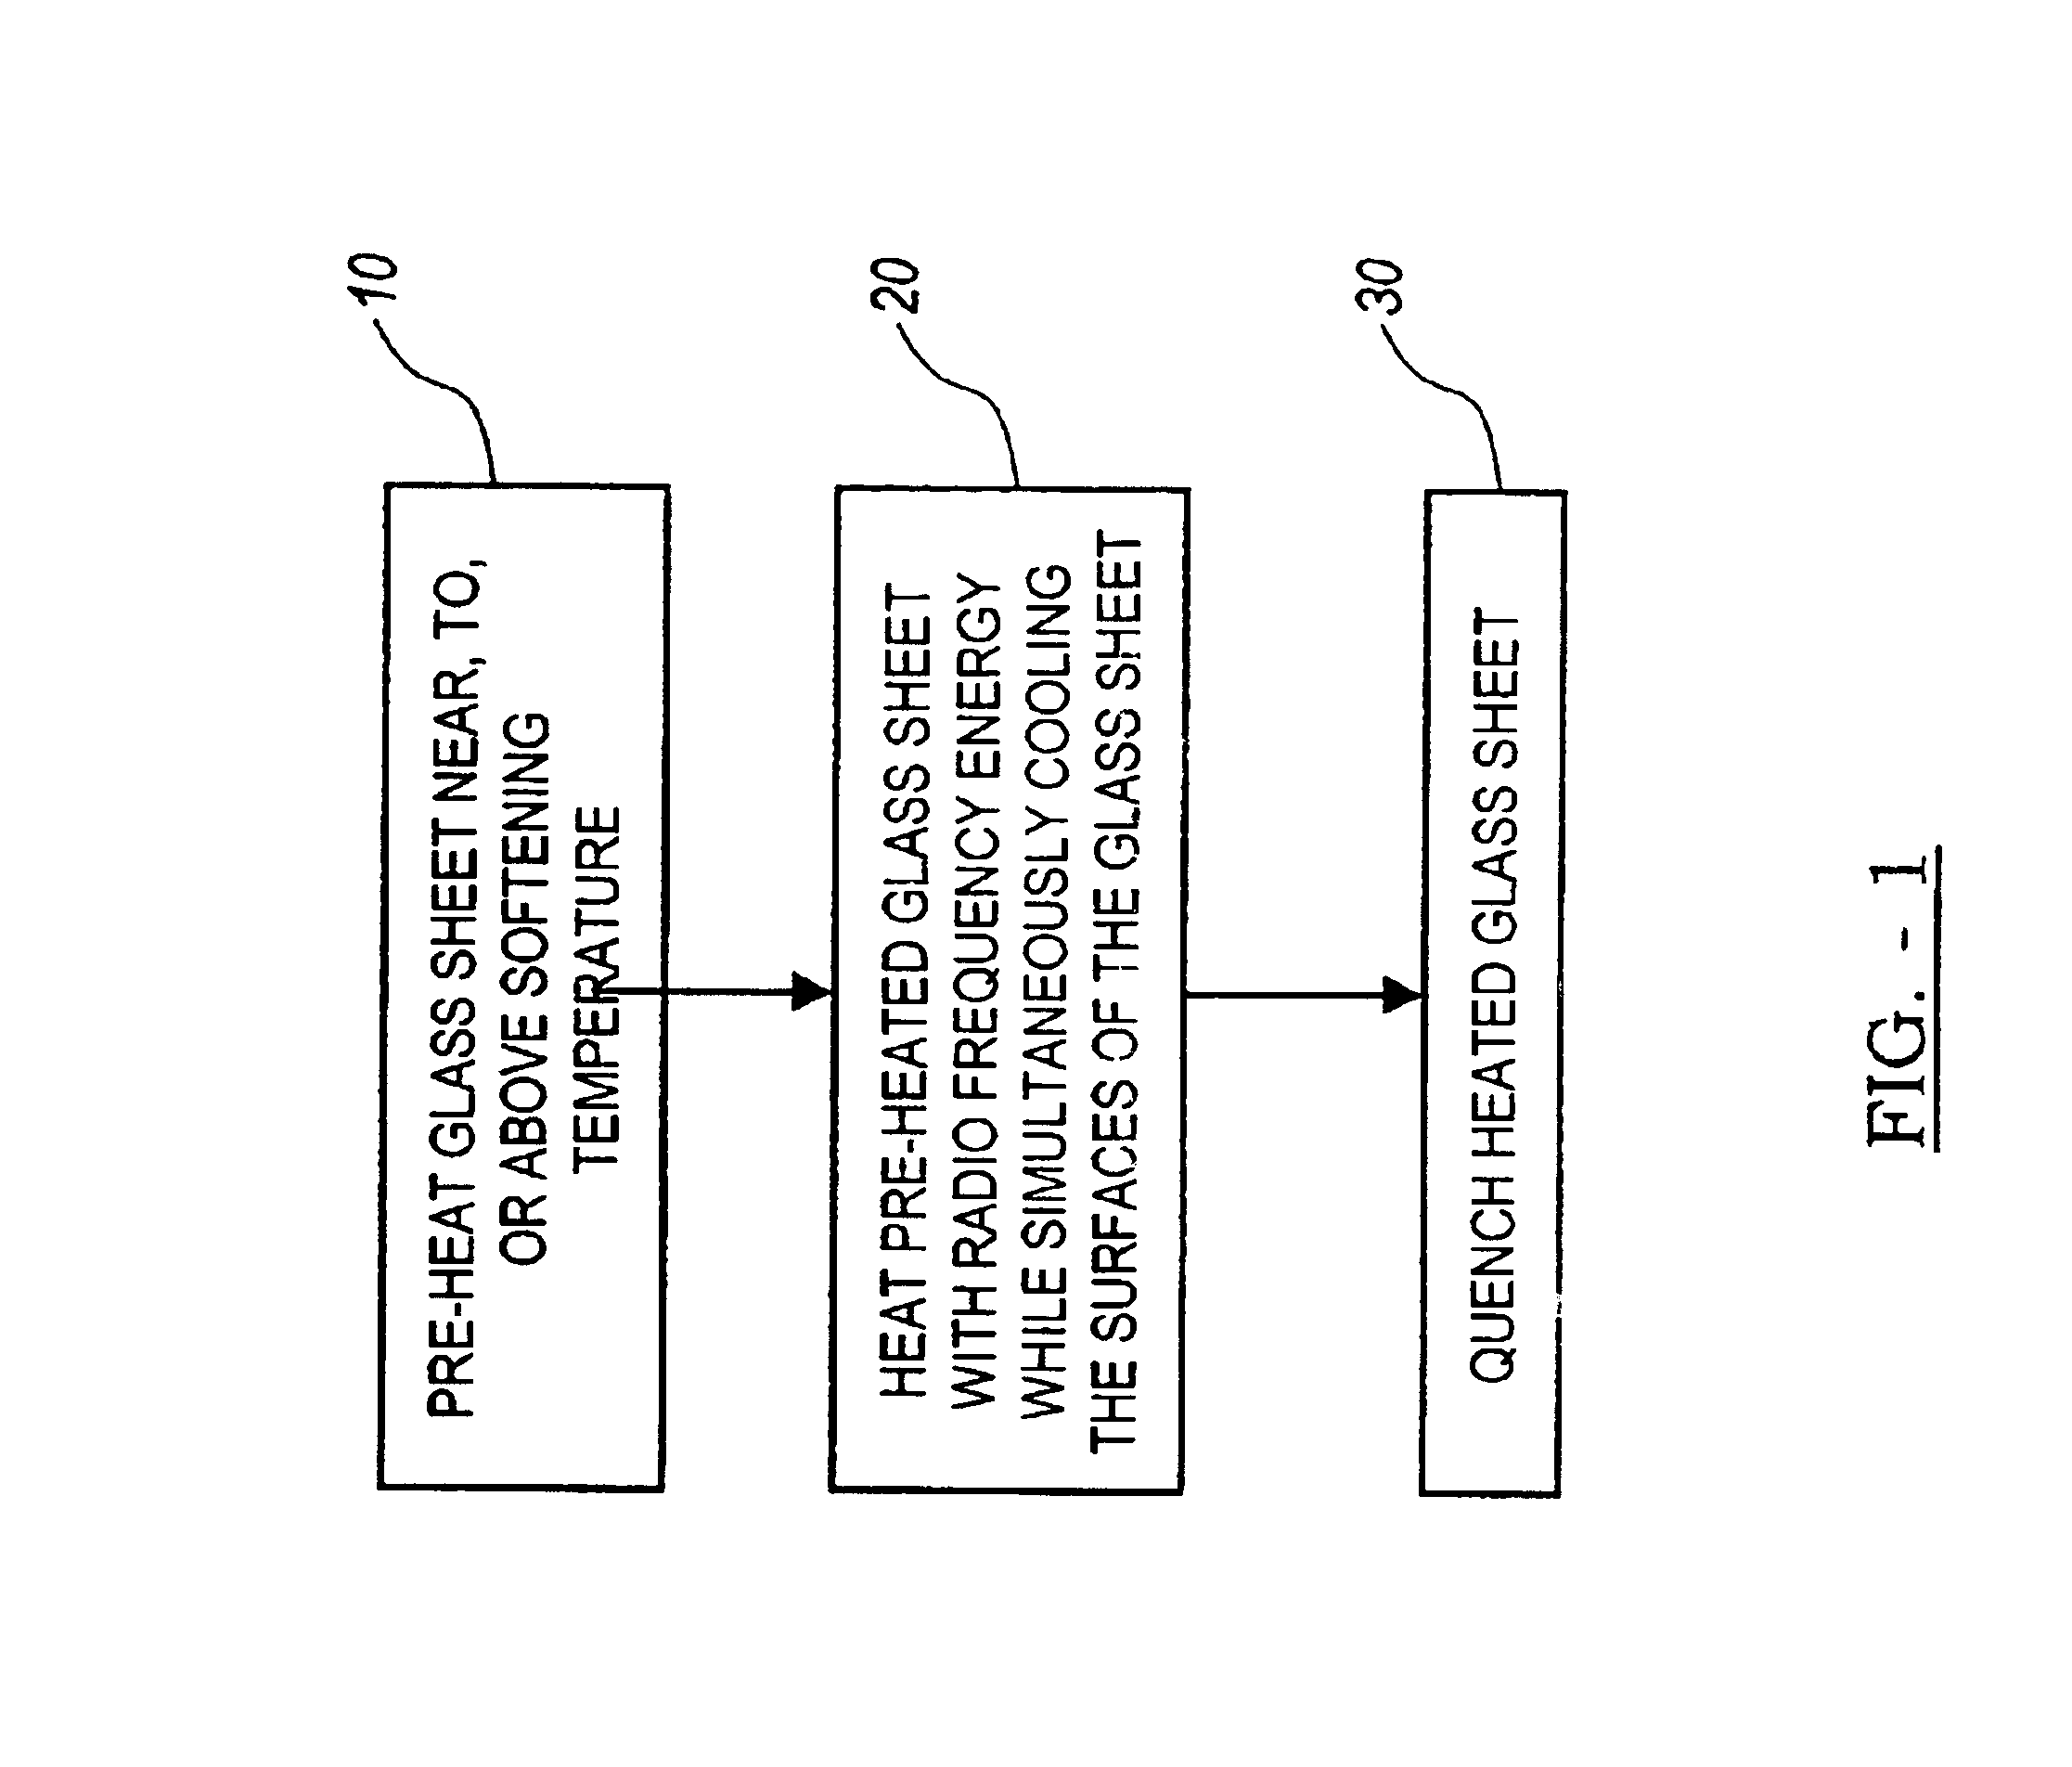 Method for simultaneously heating and cooling glass to produce tempered glass